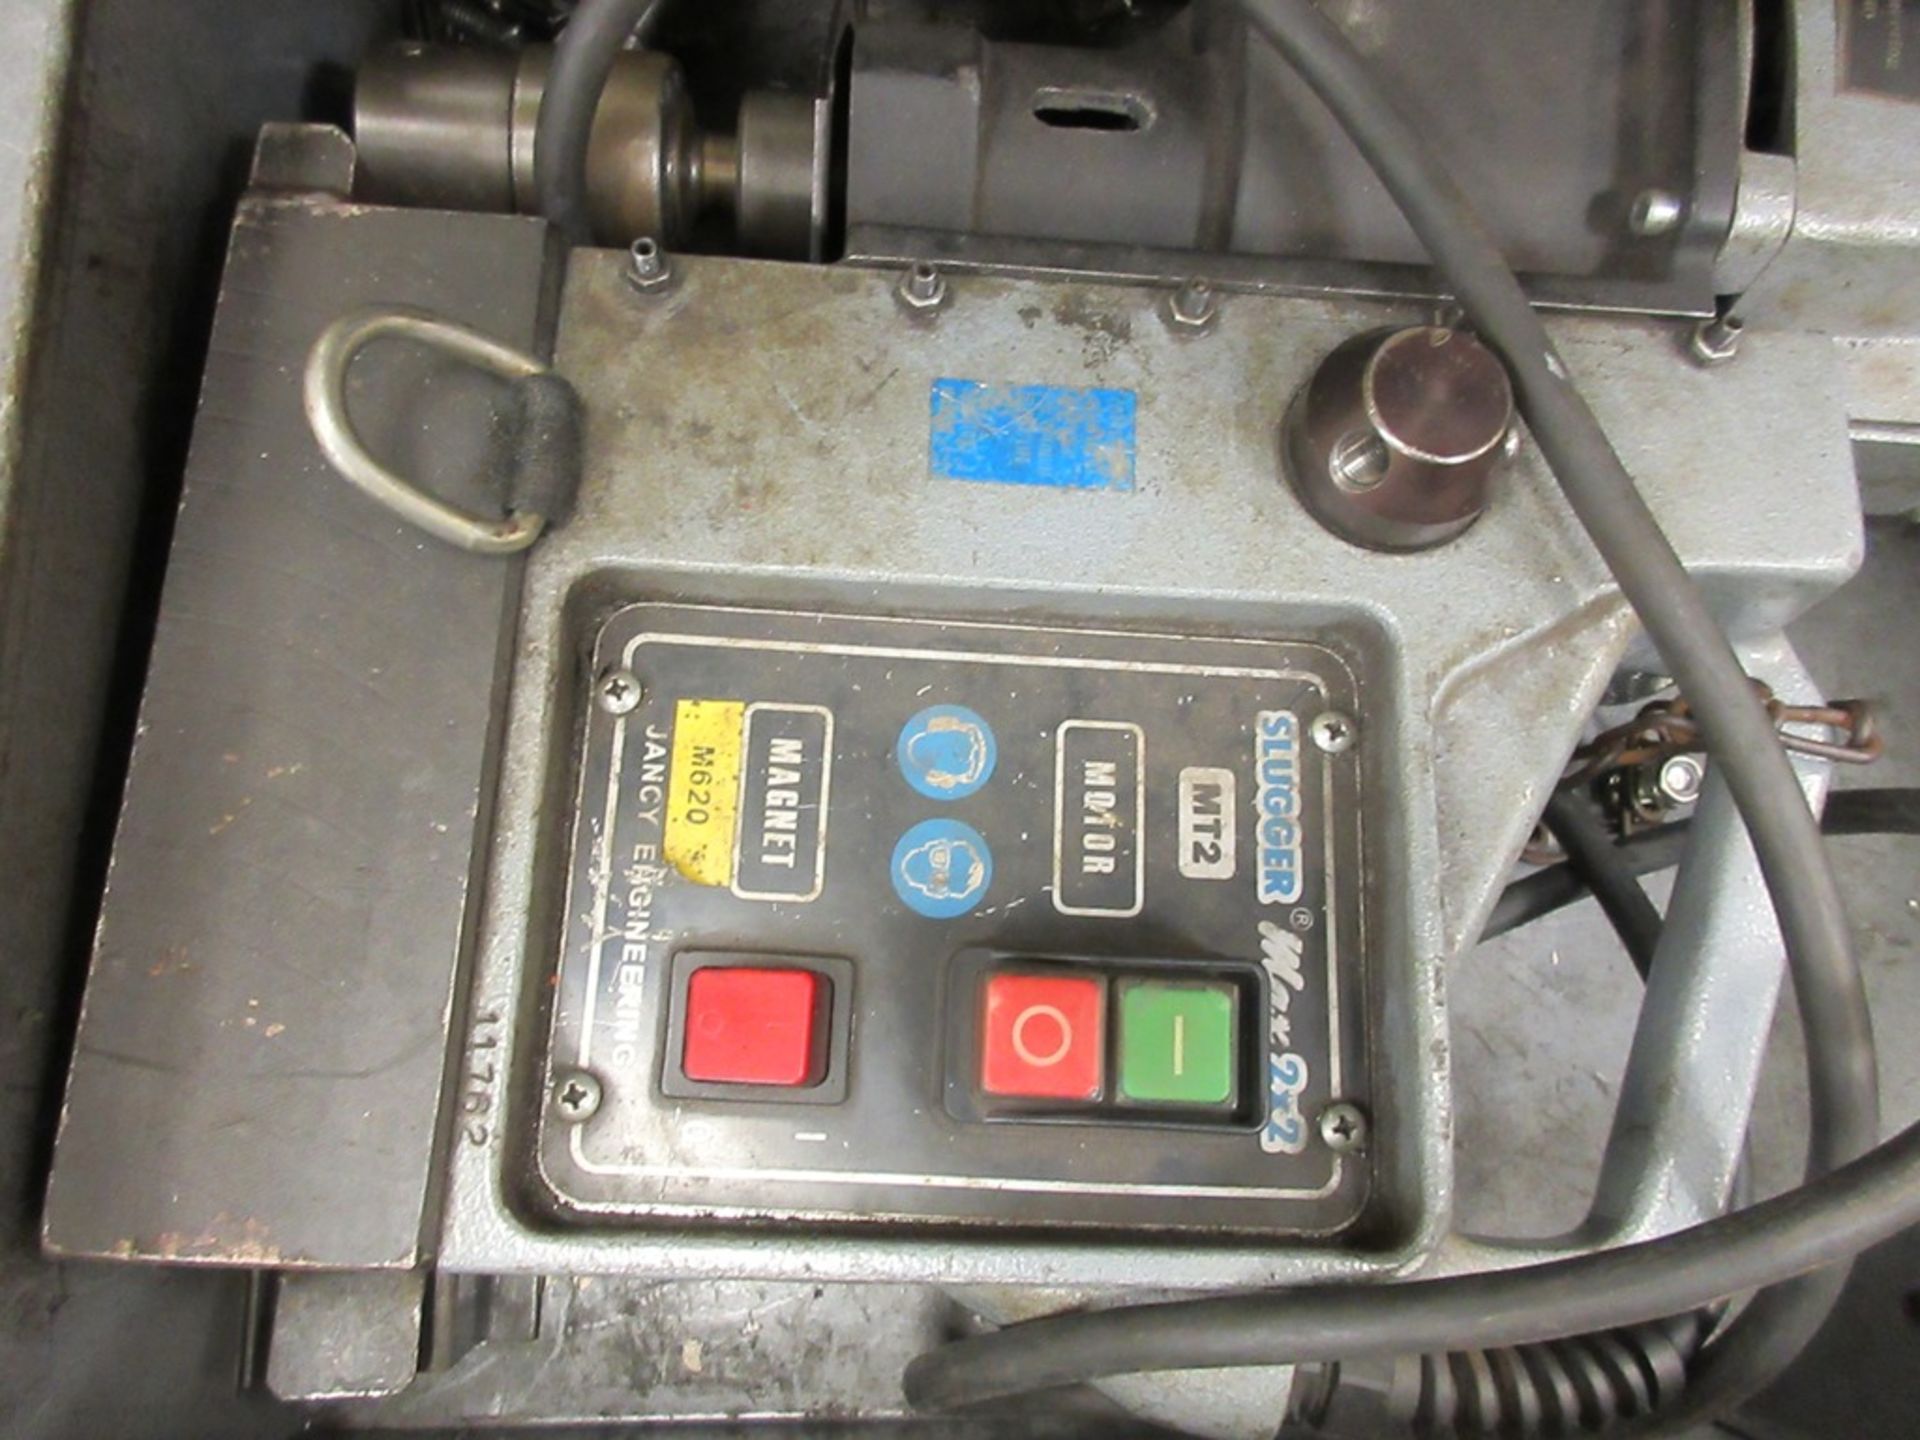 Sugger Max 2x2 magnetic drill, 110v - Image 2 of 3